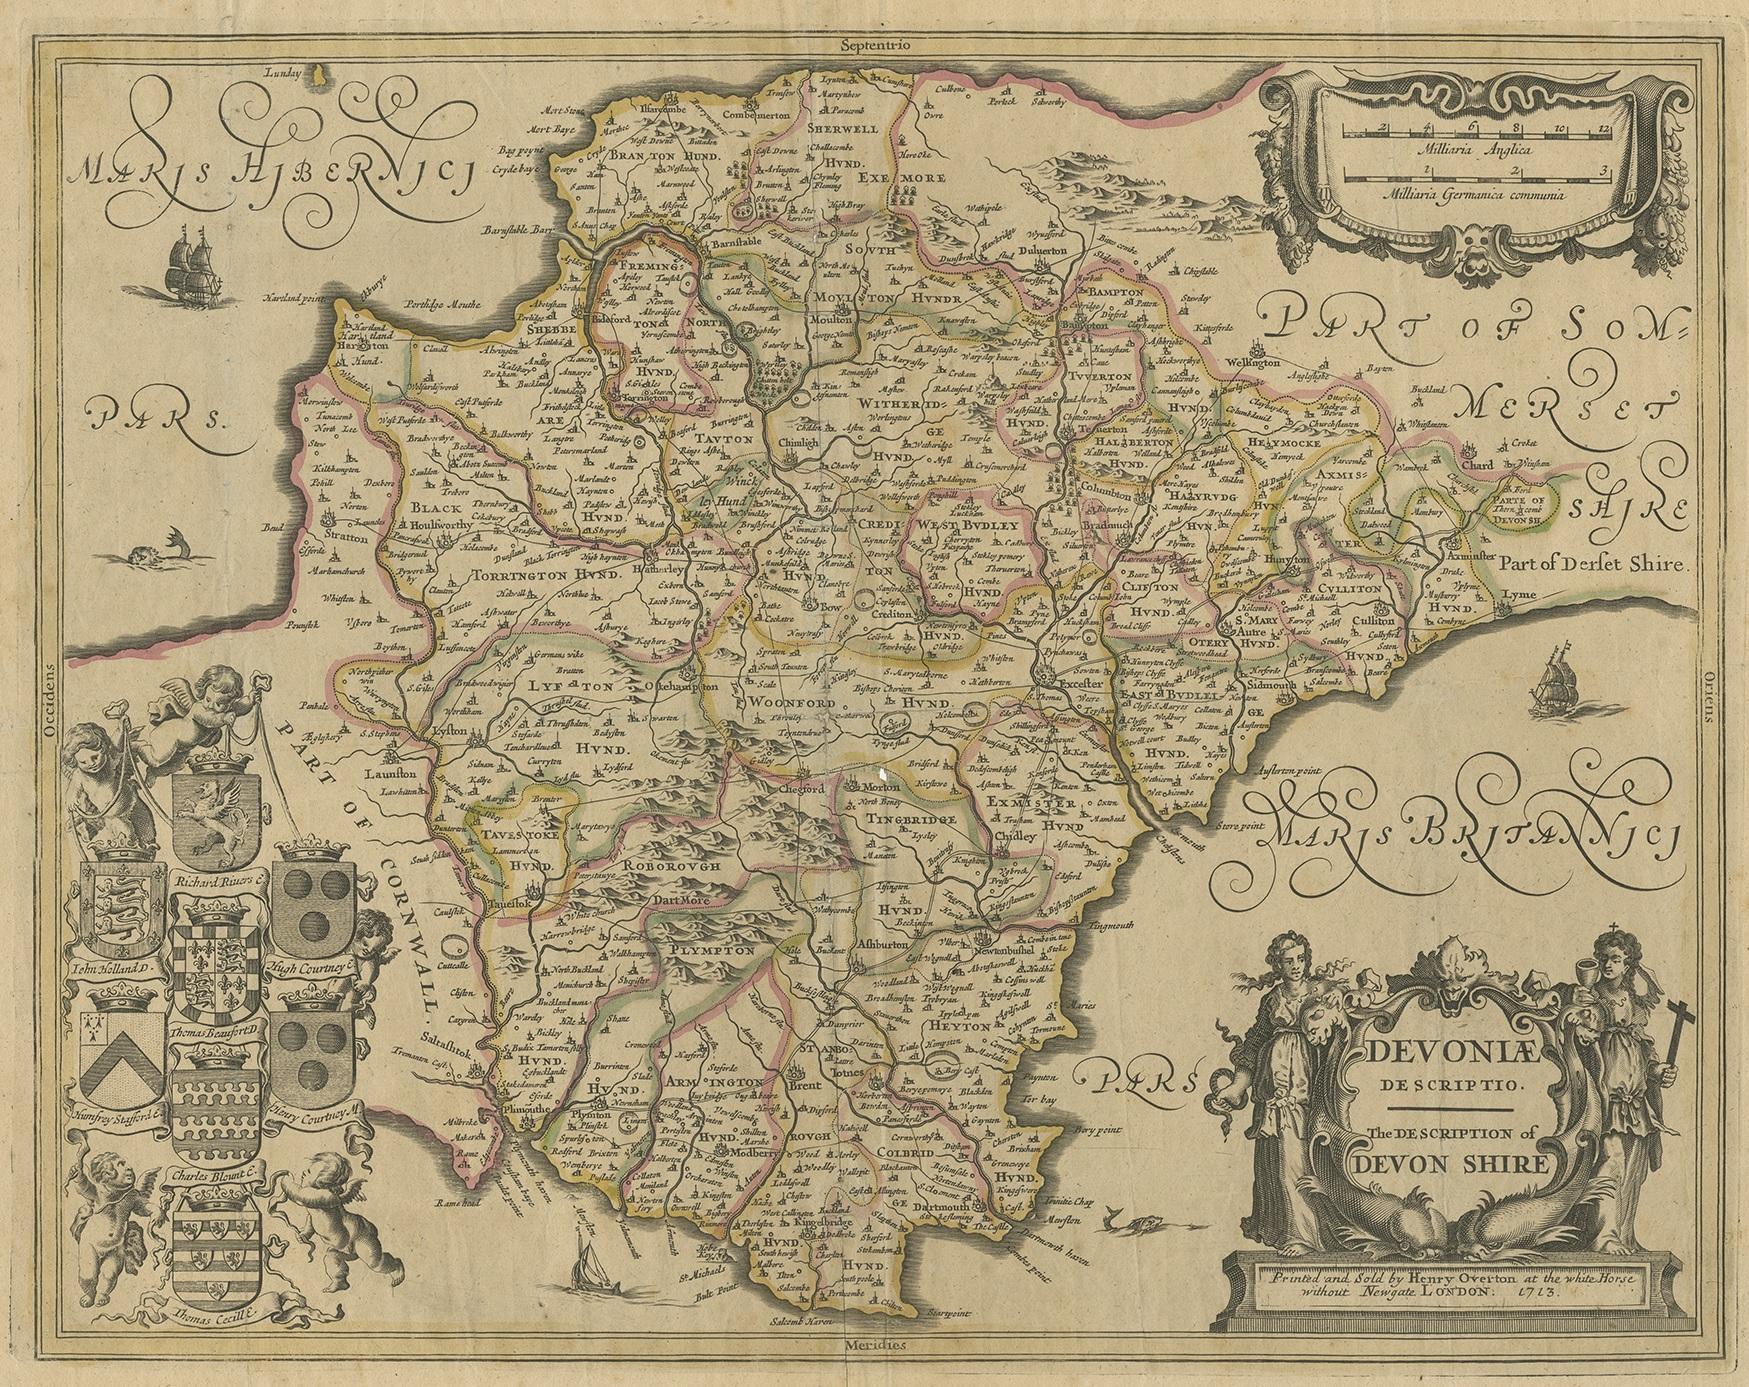 Antique map titled 'Devoniae Descriptio - The Description of Devon Shire'. Map of the county of Devon, England. This map originates from the 1713 edition of the 'Overton Atlas'. Henry Overton only revised the Devon map for this edition, replacing